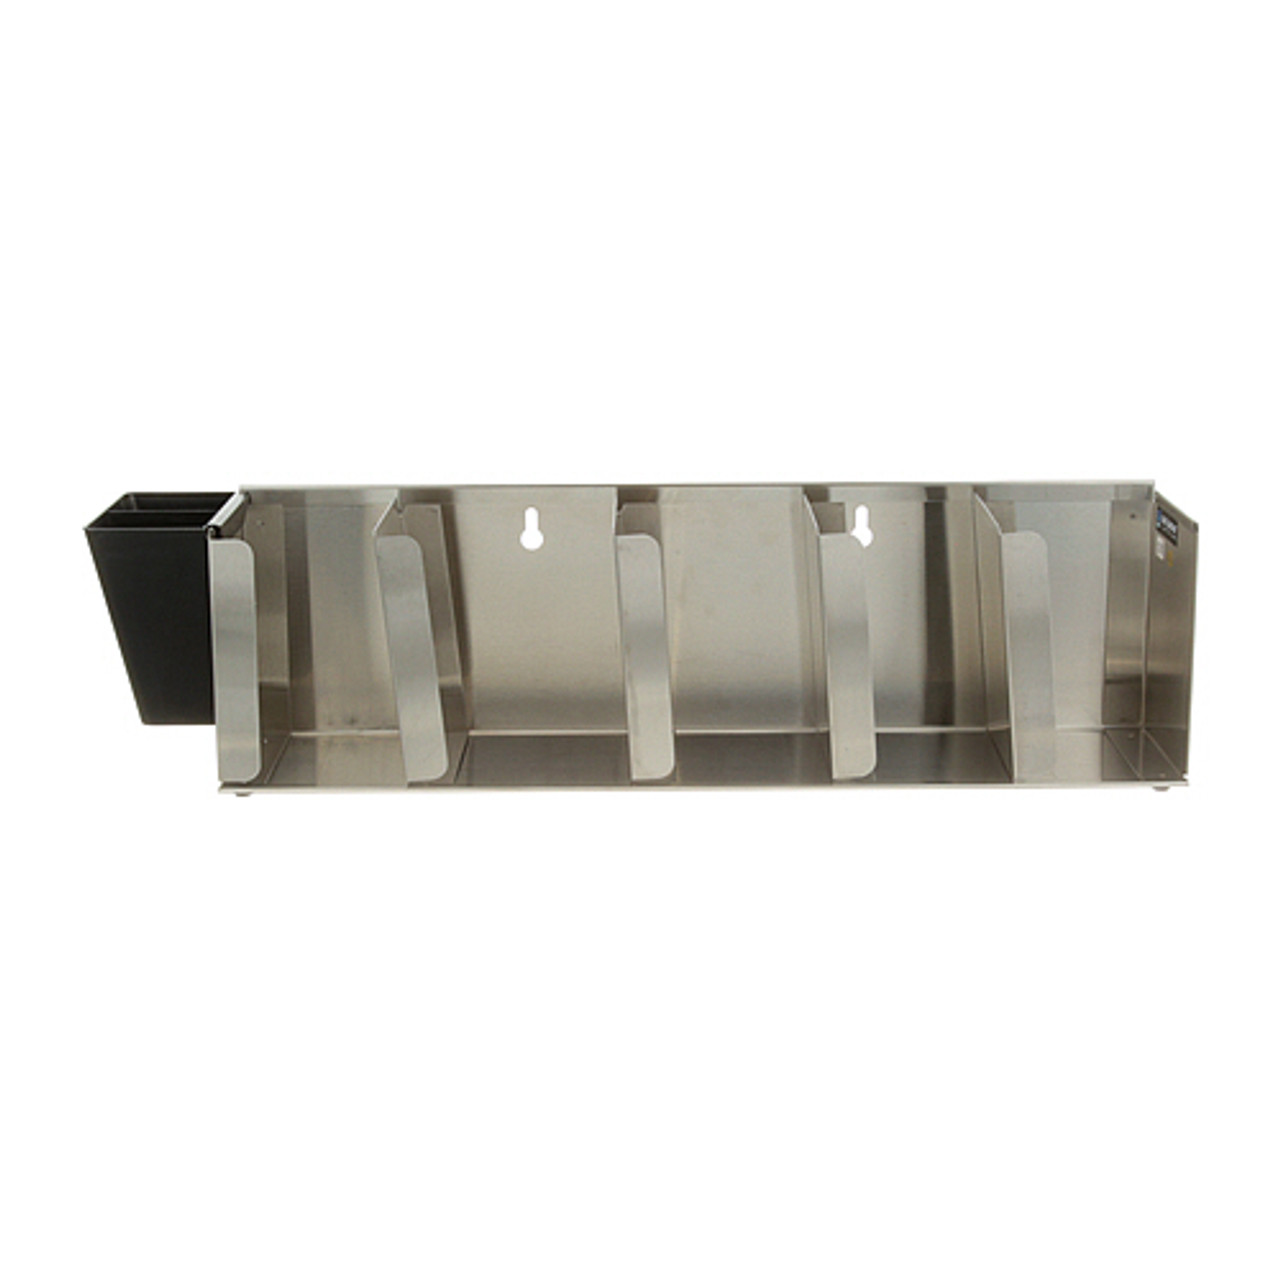 Lid Organizer - Replacement Part For AllPoints 76175